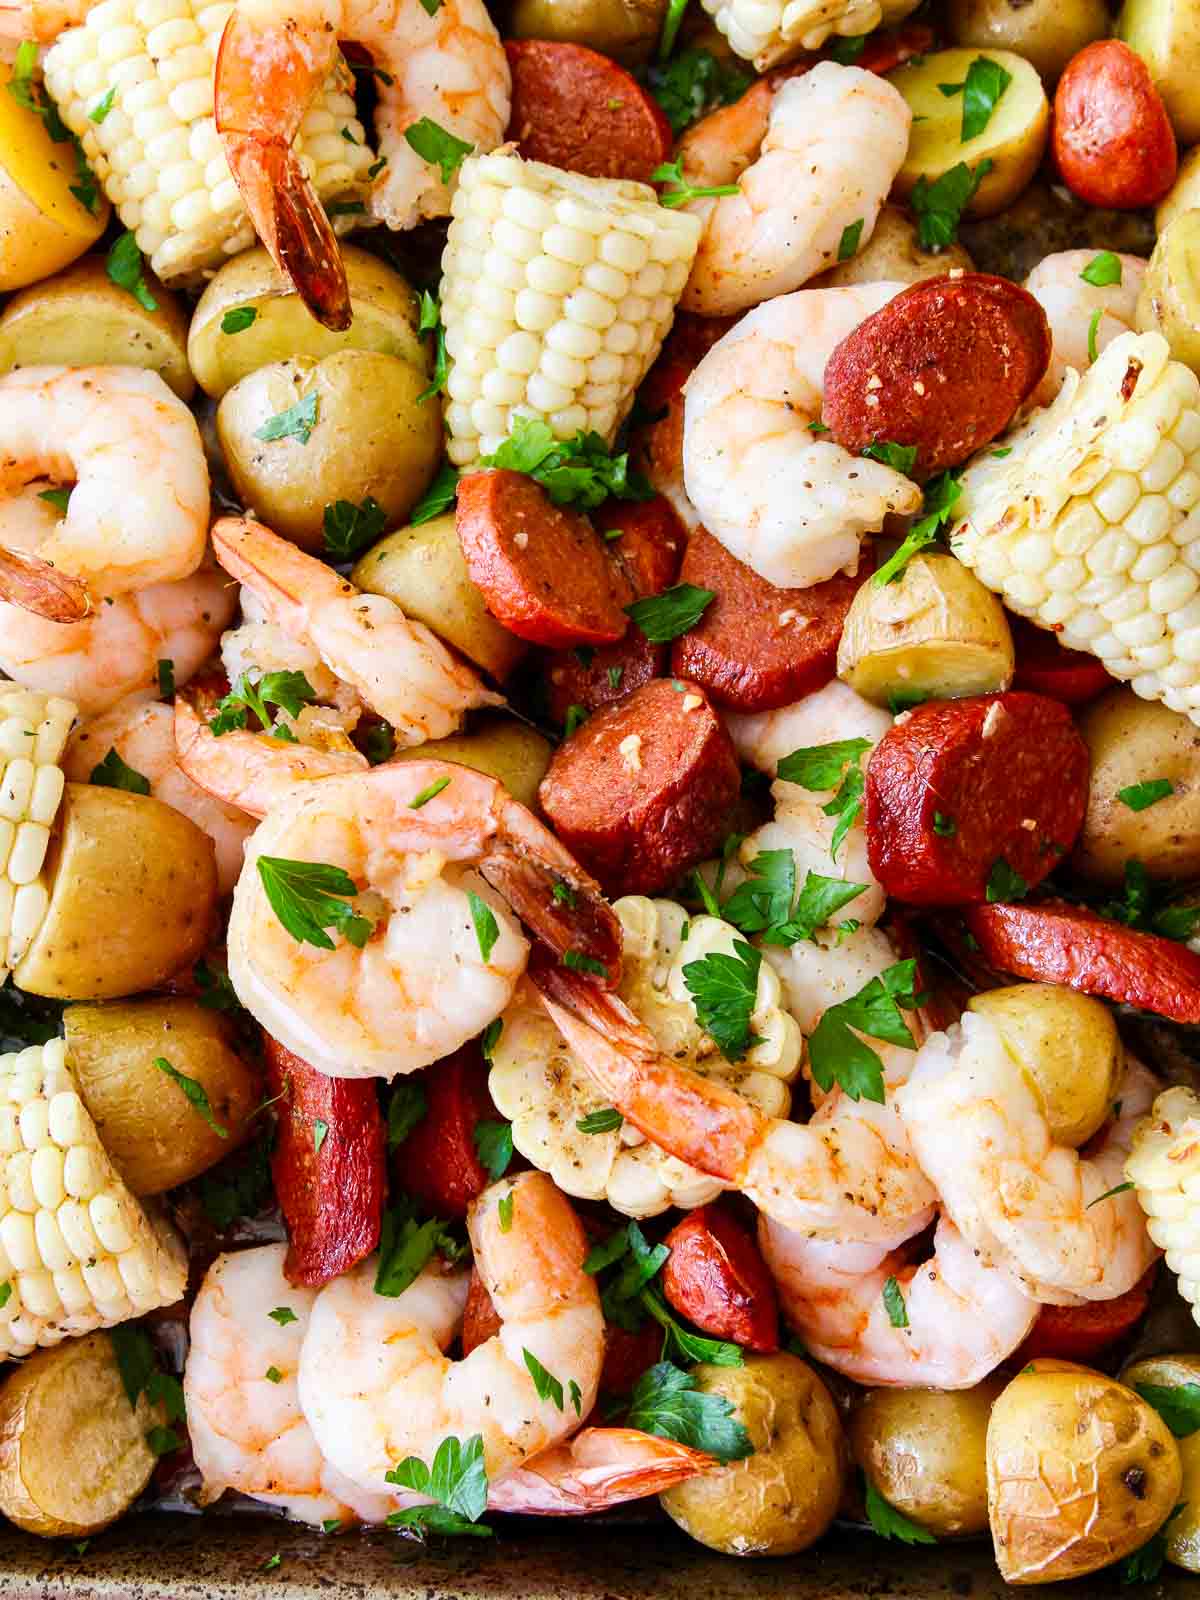 Cooked shrimp, potatoes, slices of andouille sausages and pieces of corn ready to eat for dinner. 